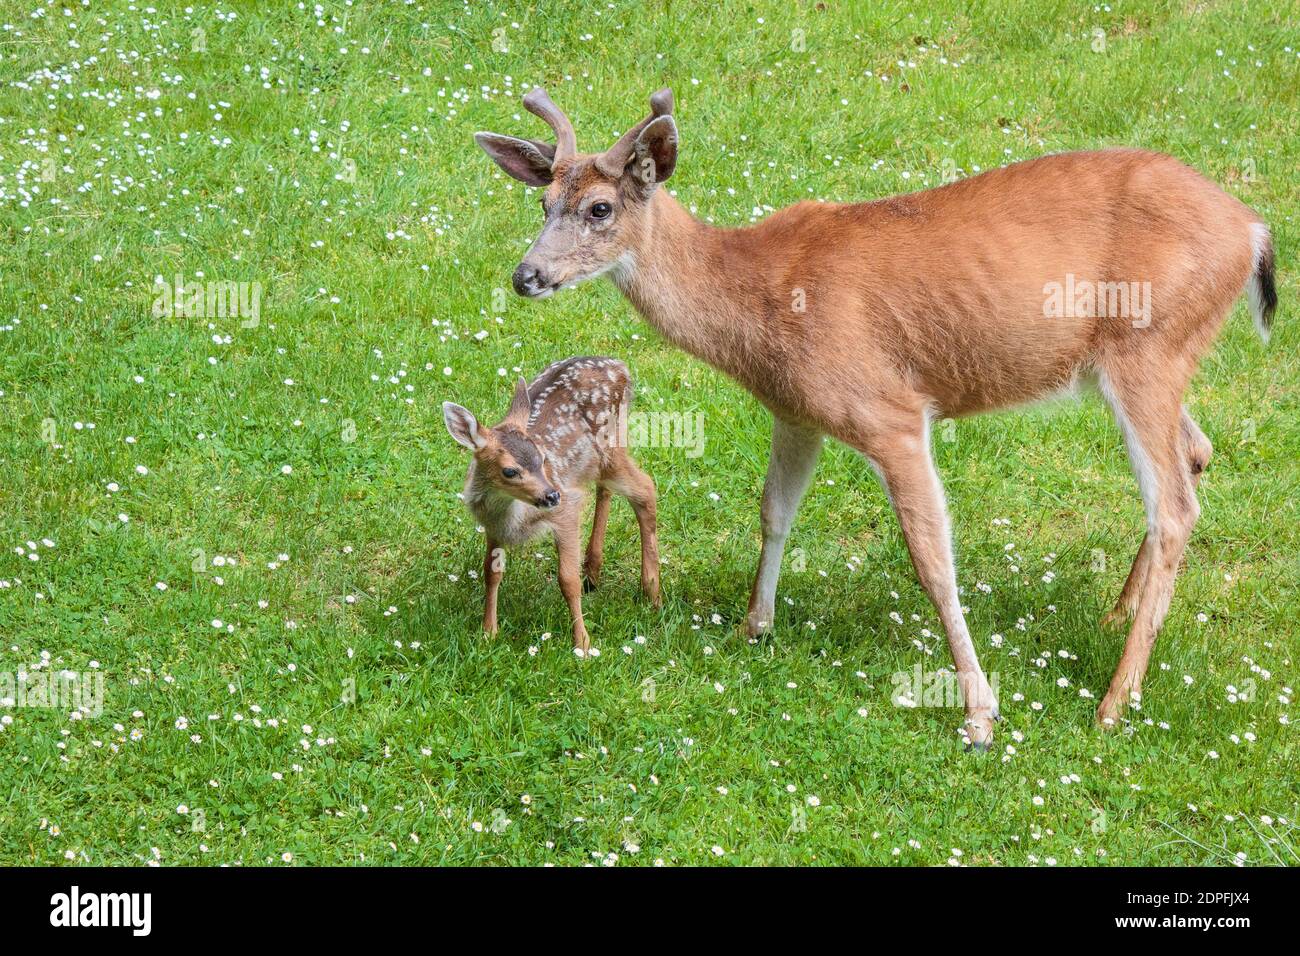 On a green lawn spotted with daisies, a male Columbian black-tailed deer with short, velvety antlers looks after a tiny spotted fawn (springtime). Stock Photo